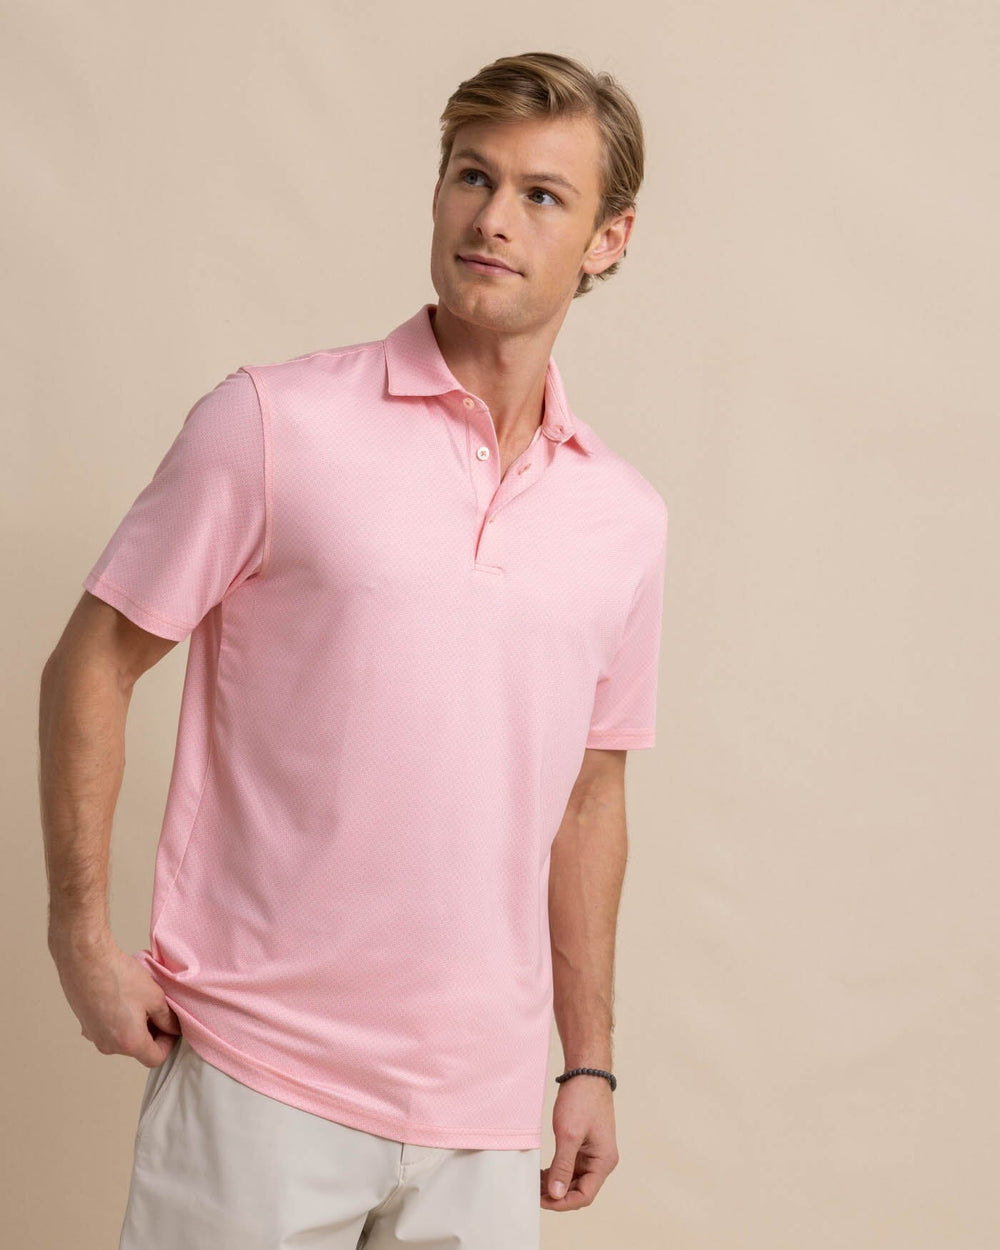 The front view of the Southern Tide Driver Coastal Geo Polo Shirt by Southern Tide - Flamingo Pink